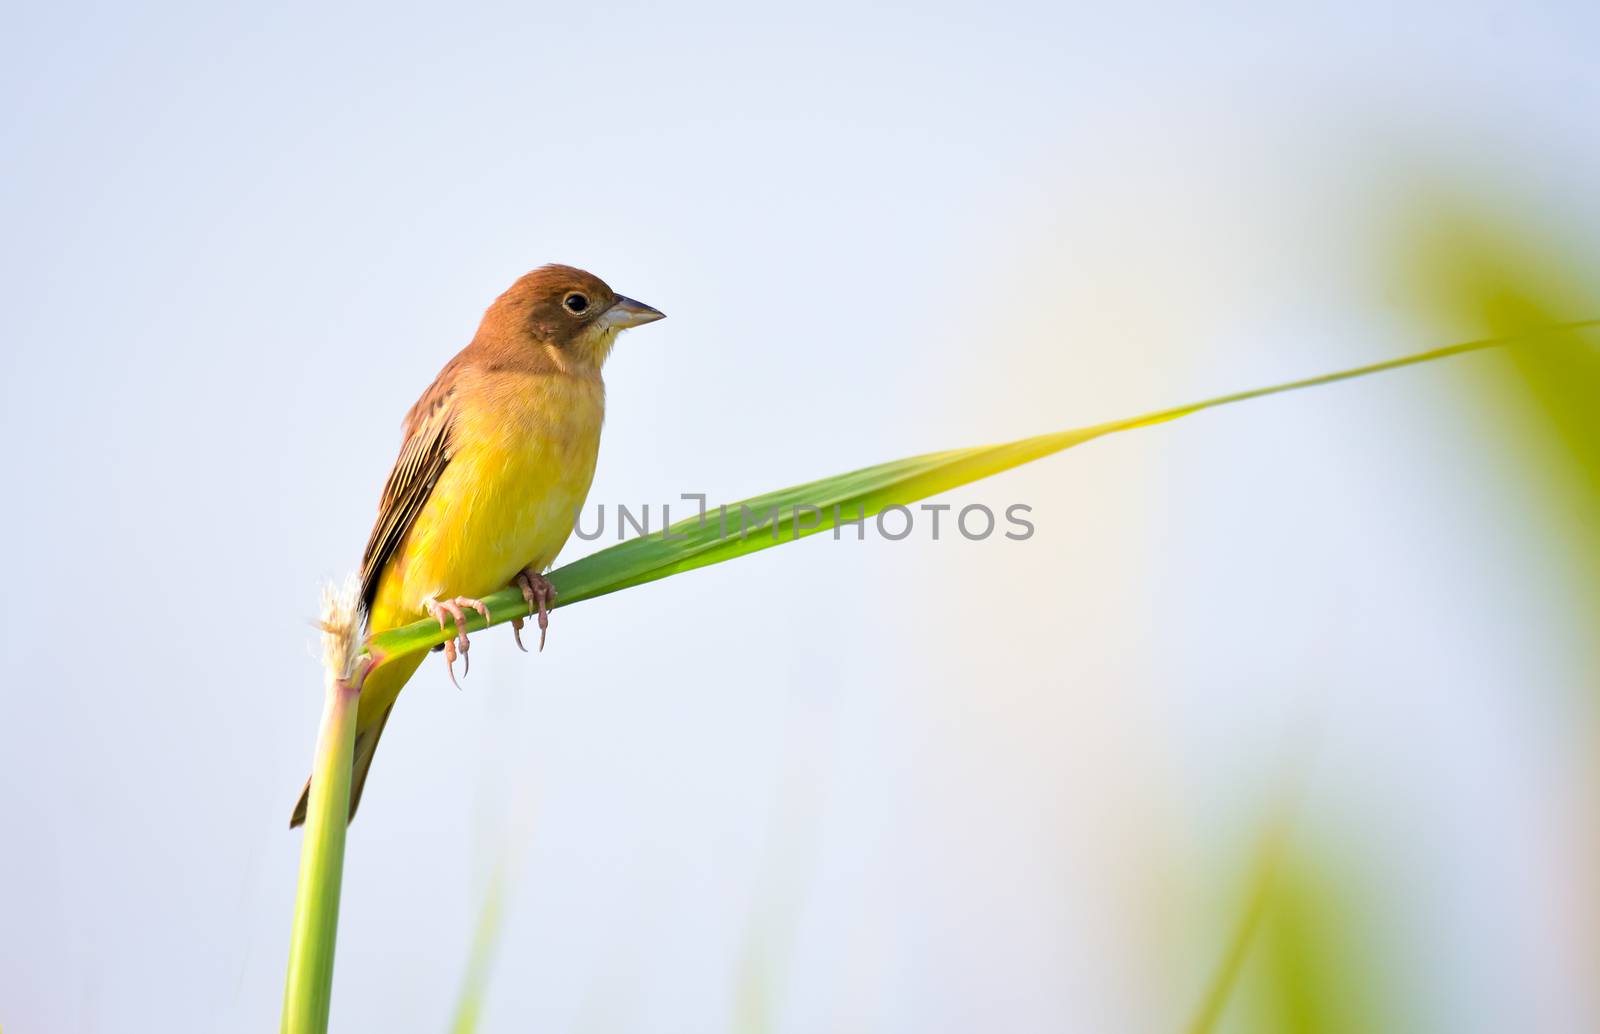 The red-headed bunting is a passerine bird in the bunting family Emberizidae, a group now separated by most modern authors from the finches, Fringillidae.